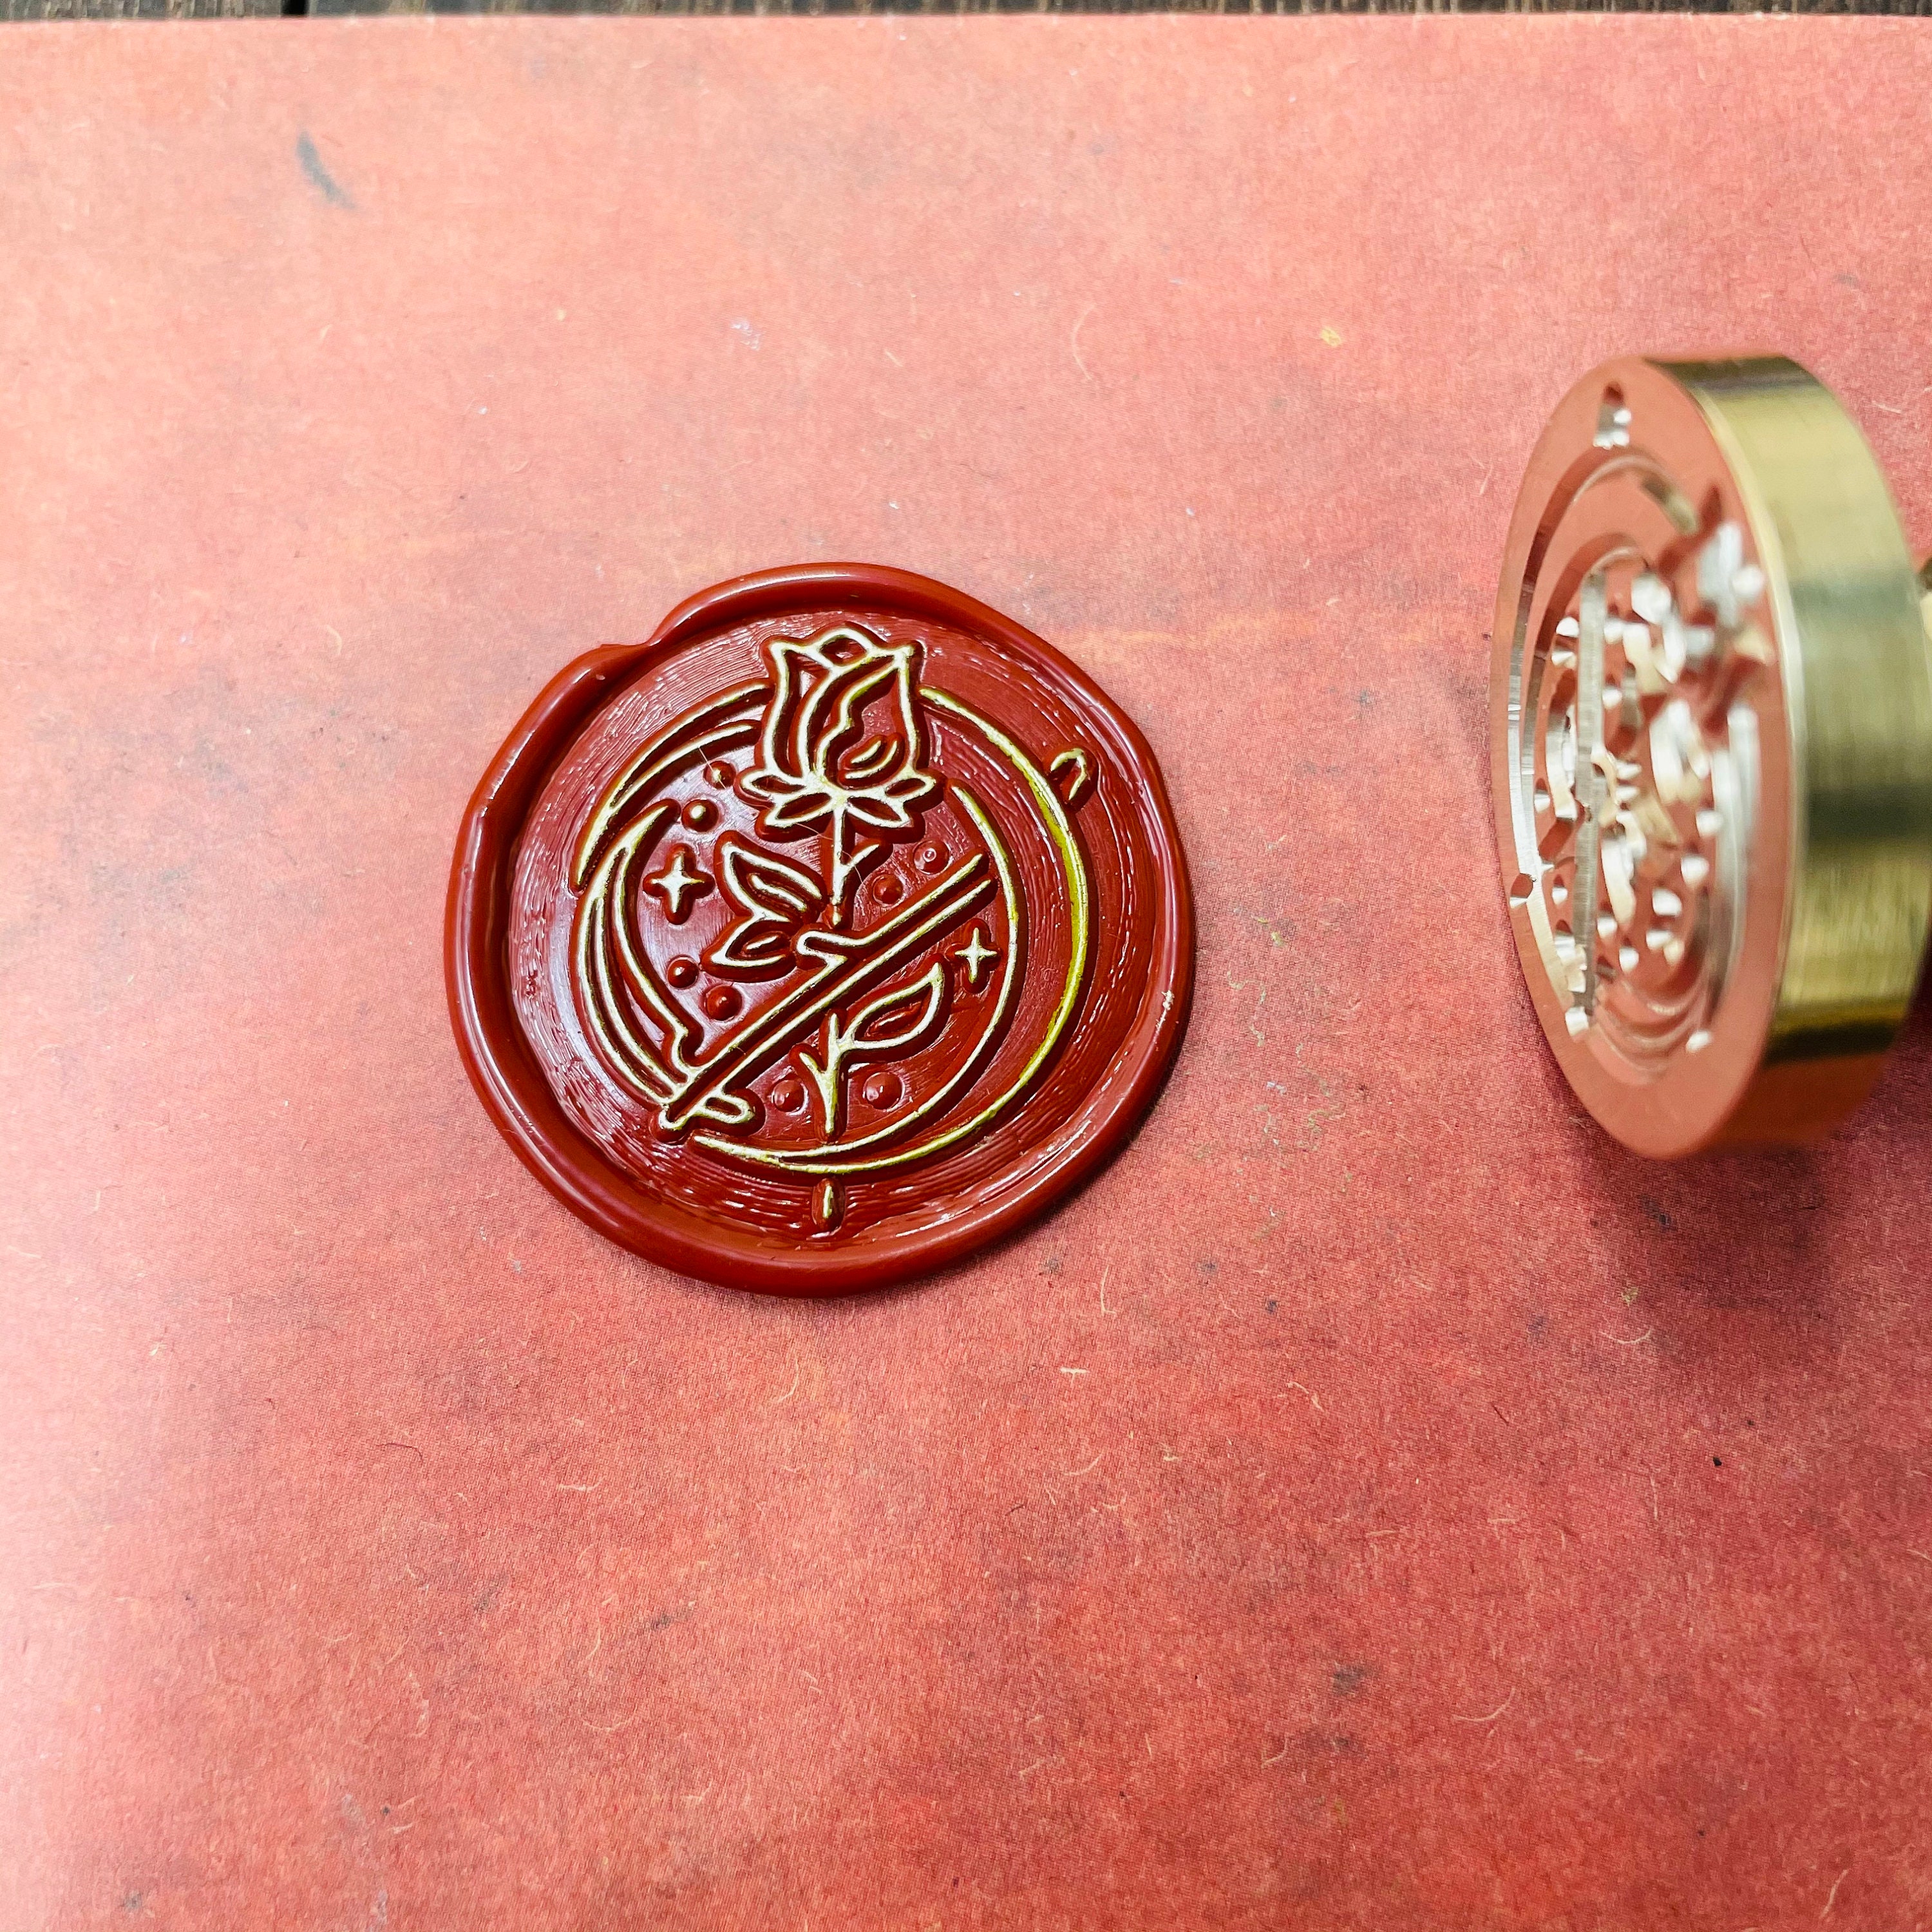 Rose &casement Wax Seal Stamp, Wax Seal Stamp , Retro Stamps With Handle,  Wax Sealing Stamp, Casement Wax Seal Stamp,wax Seals 